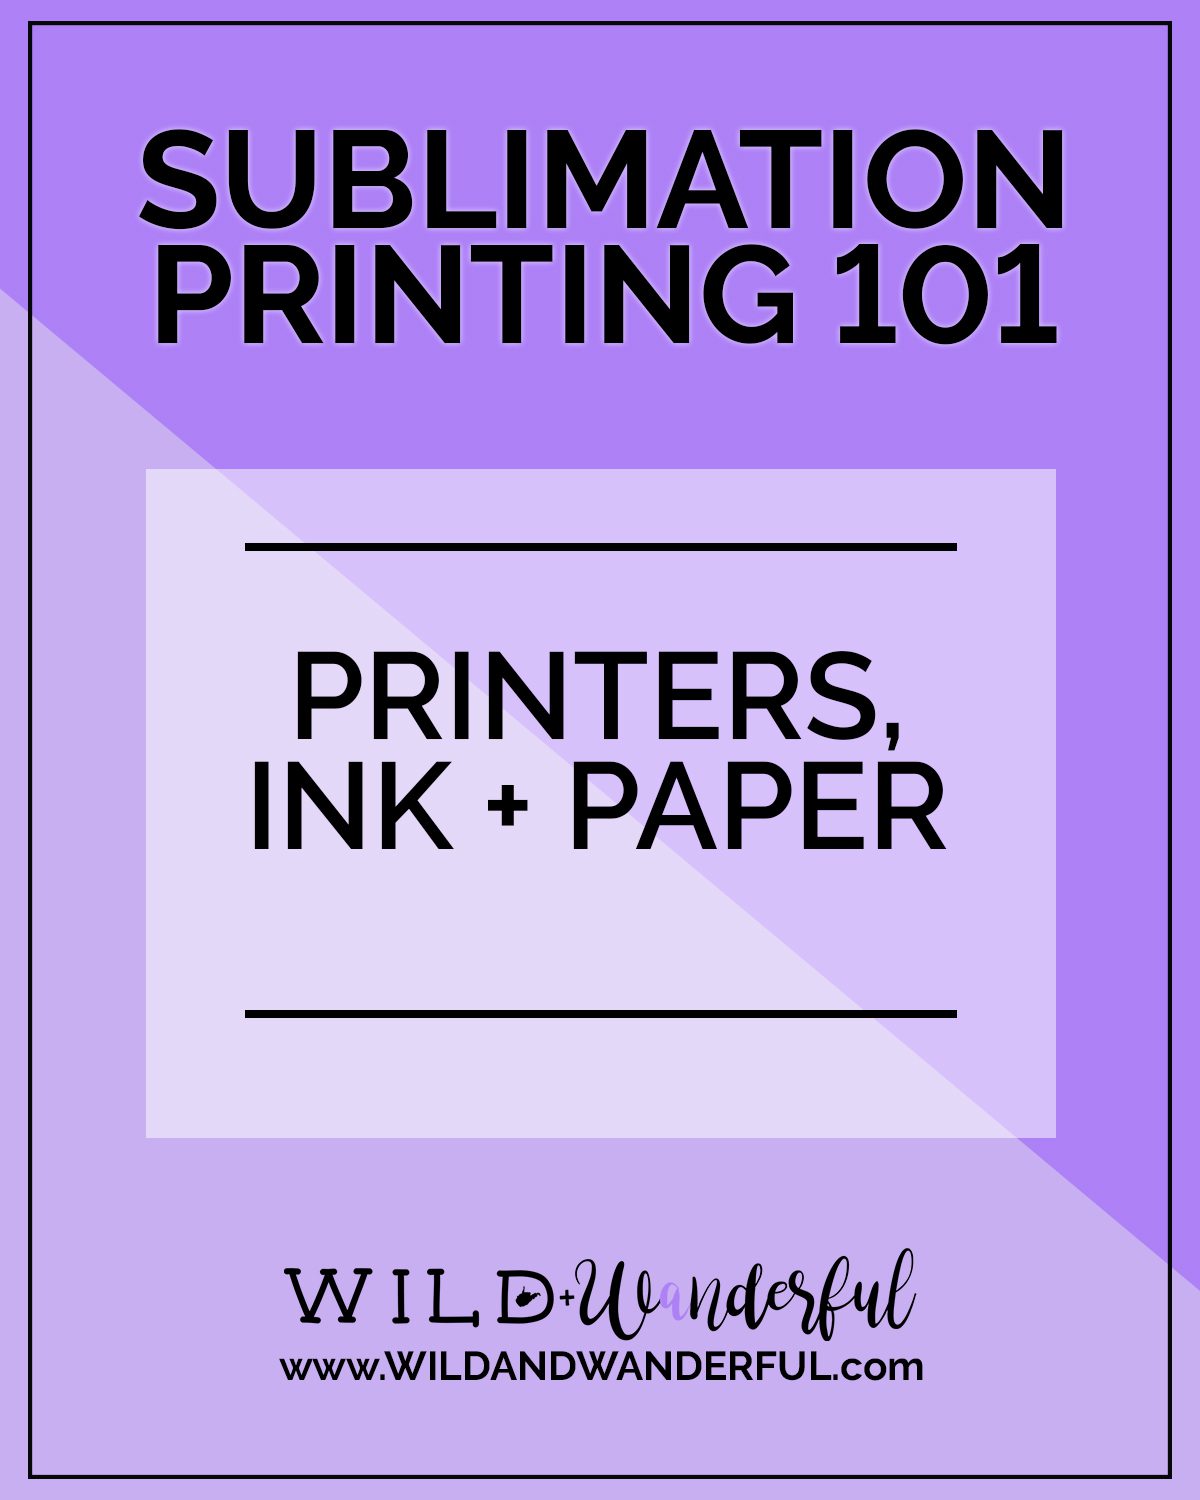 Sublimation Printing 101, Printers, Ink + Paper